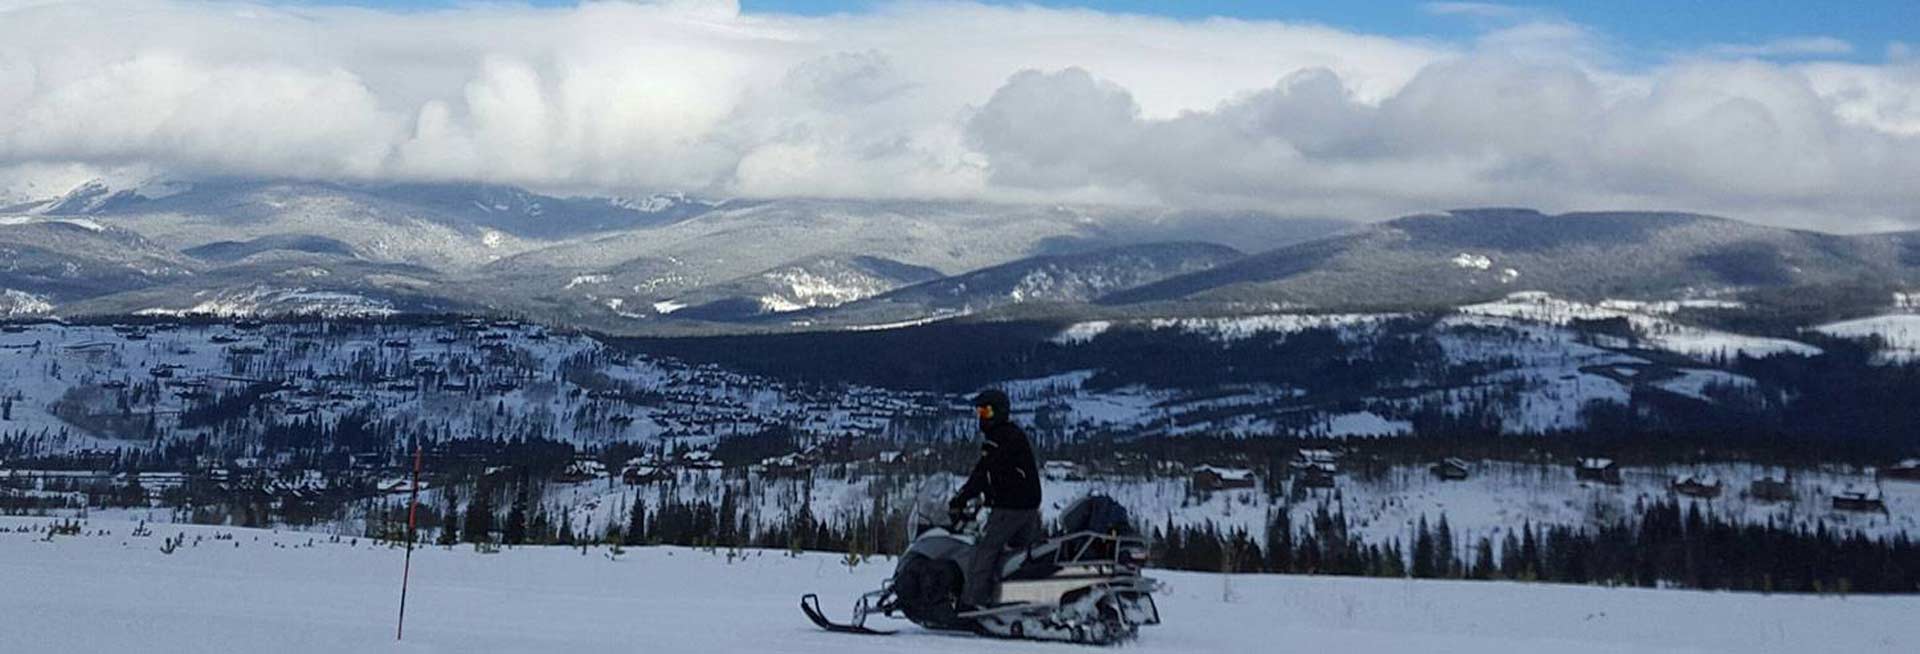 Snowmobiler on the trail overlooking the mountains.